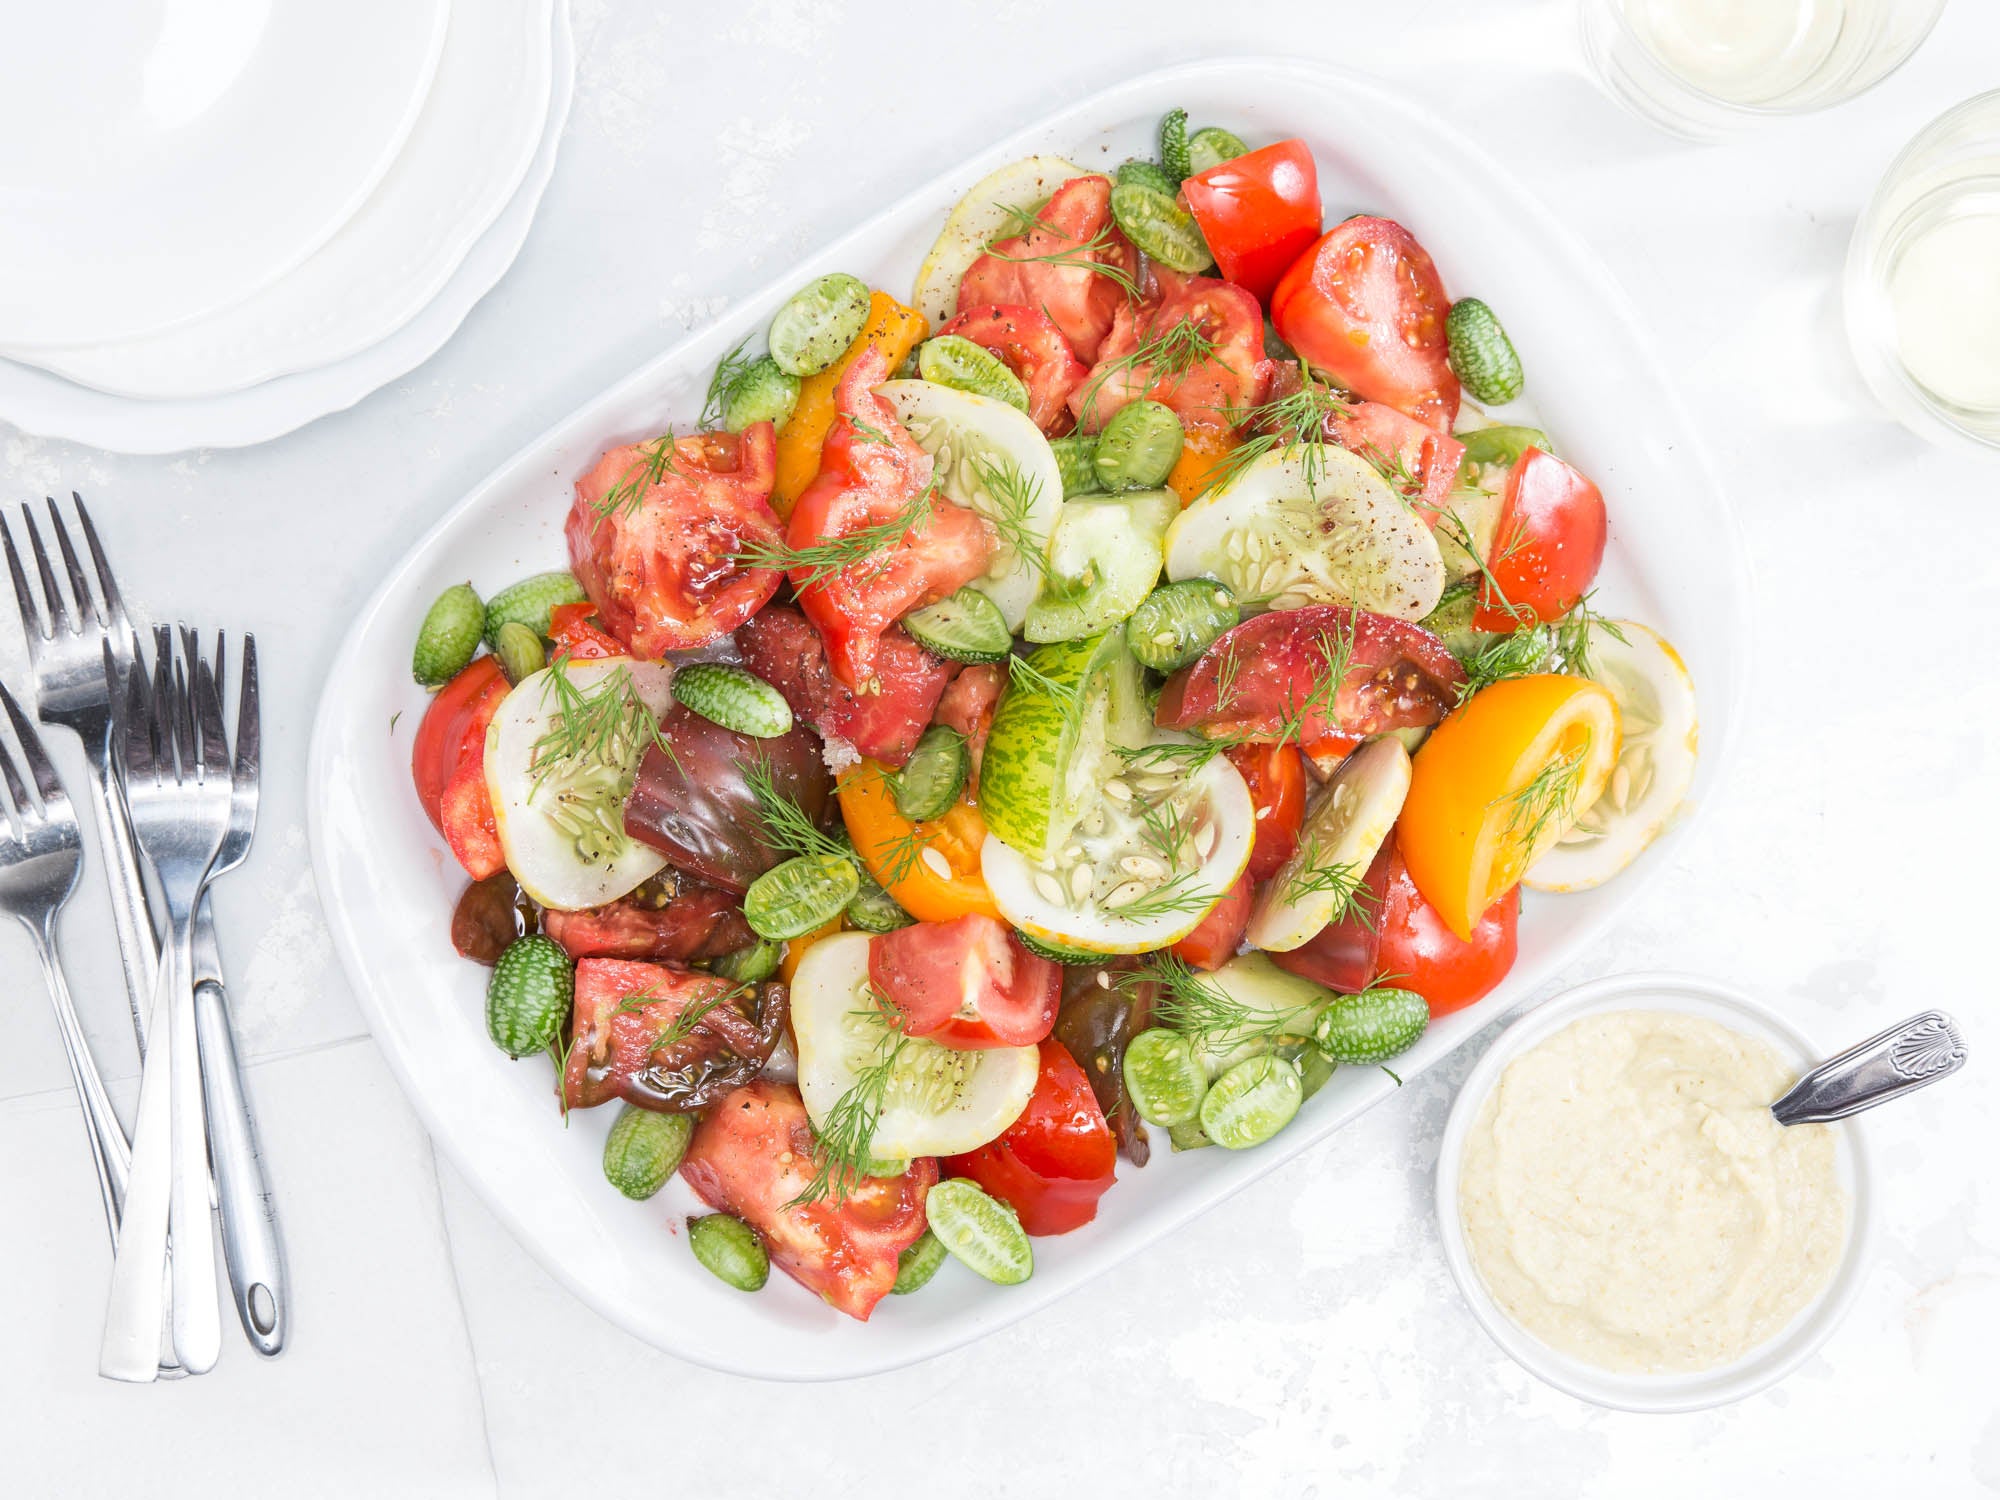 Tomato-Cucumber Salad with Fennel Dressing.